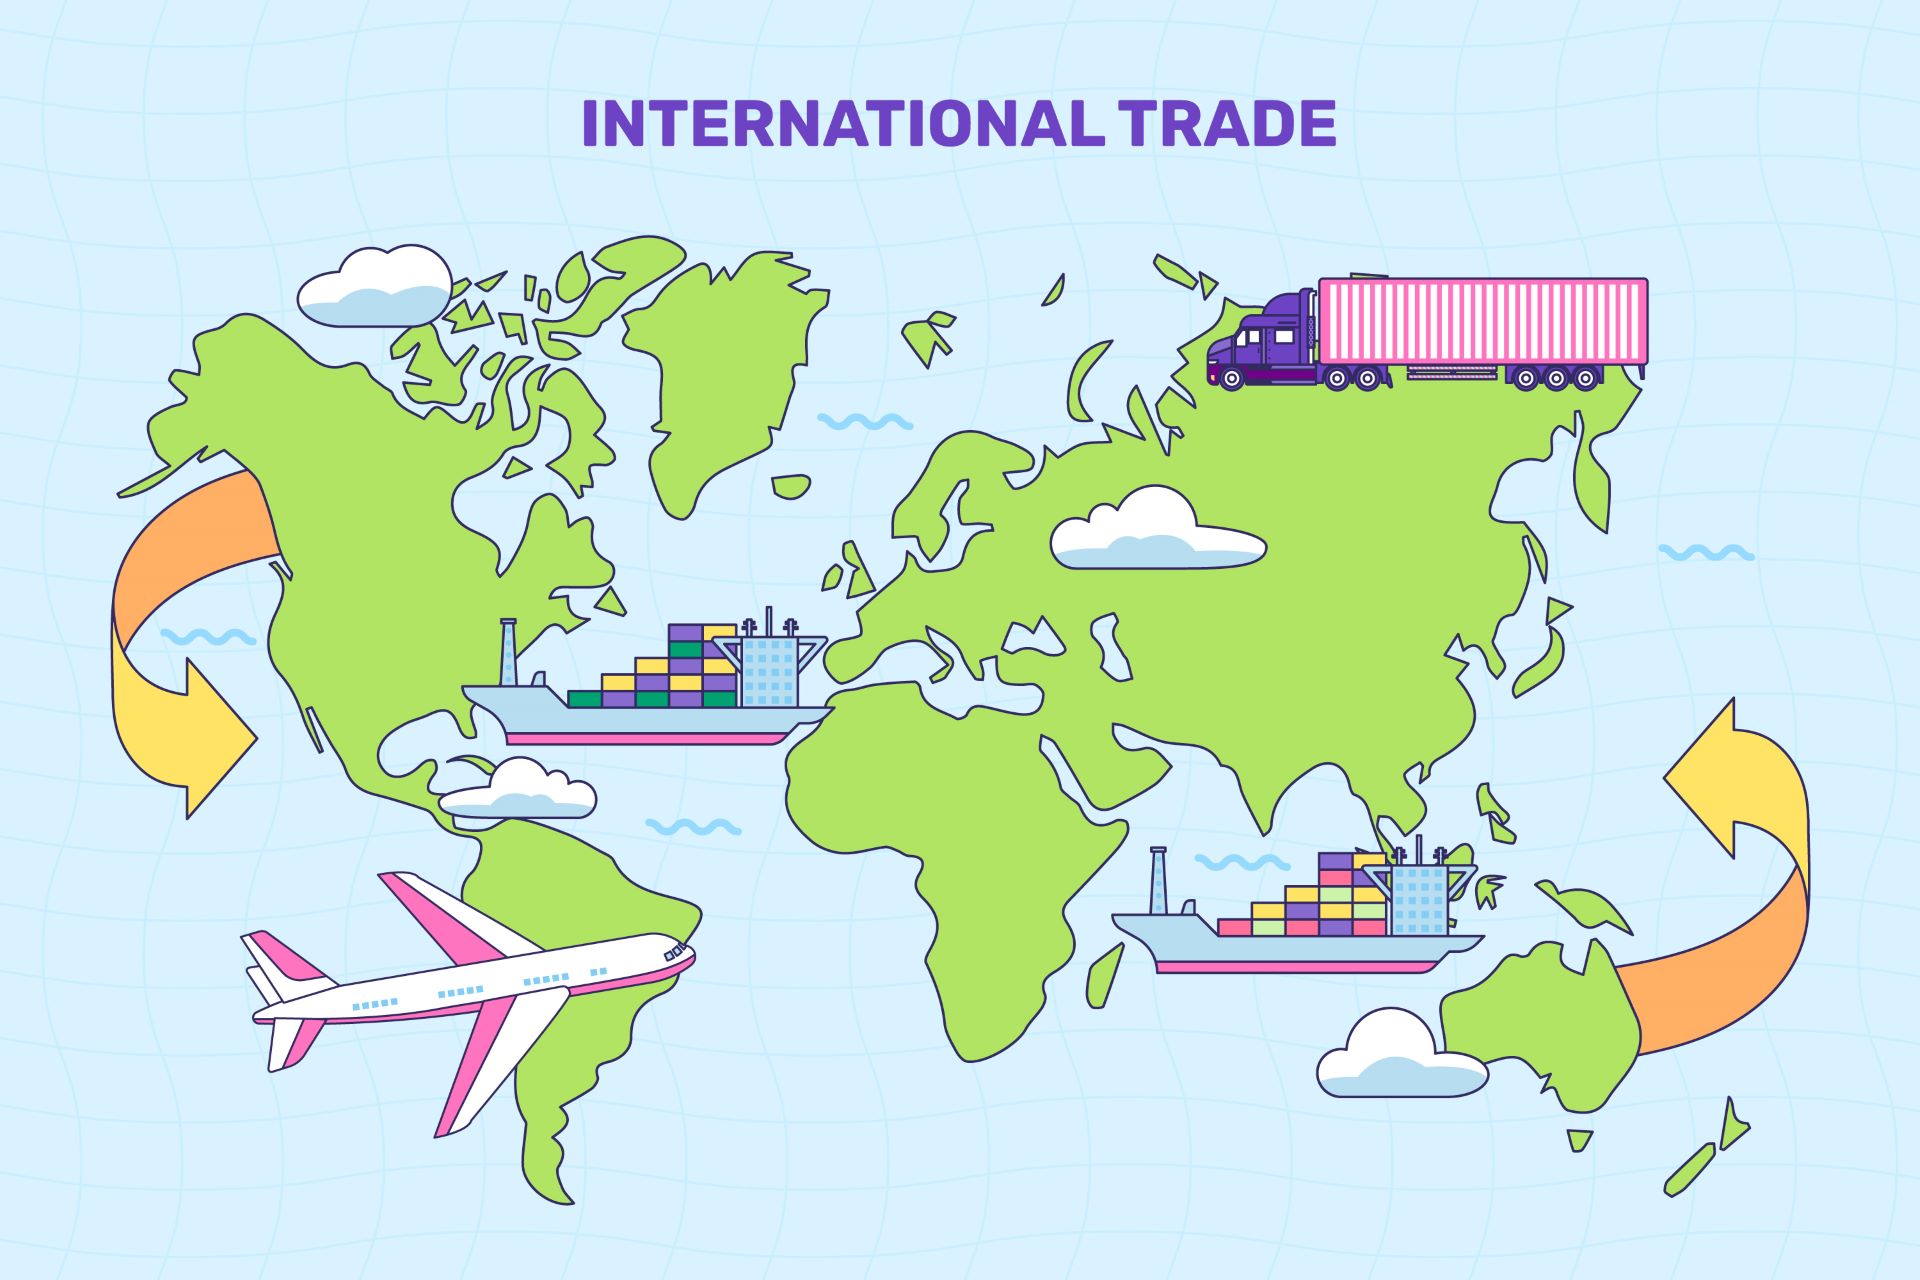 The development of international trade and its impact on banking